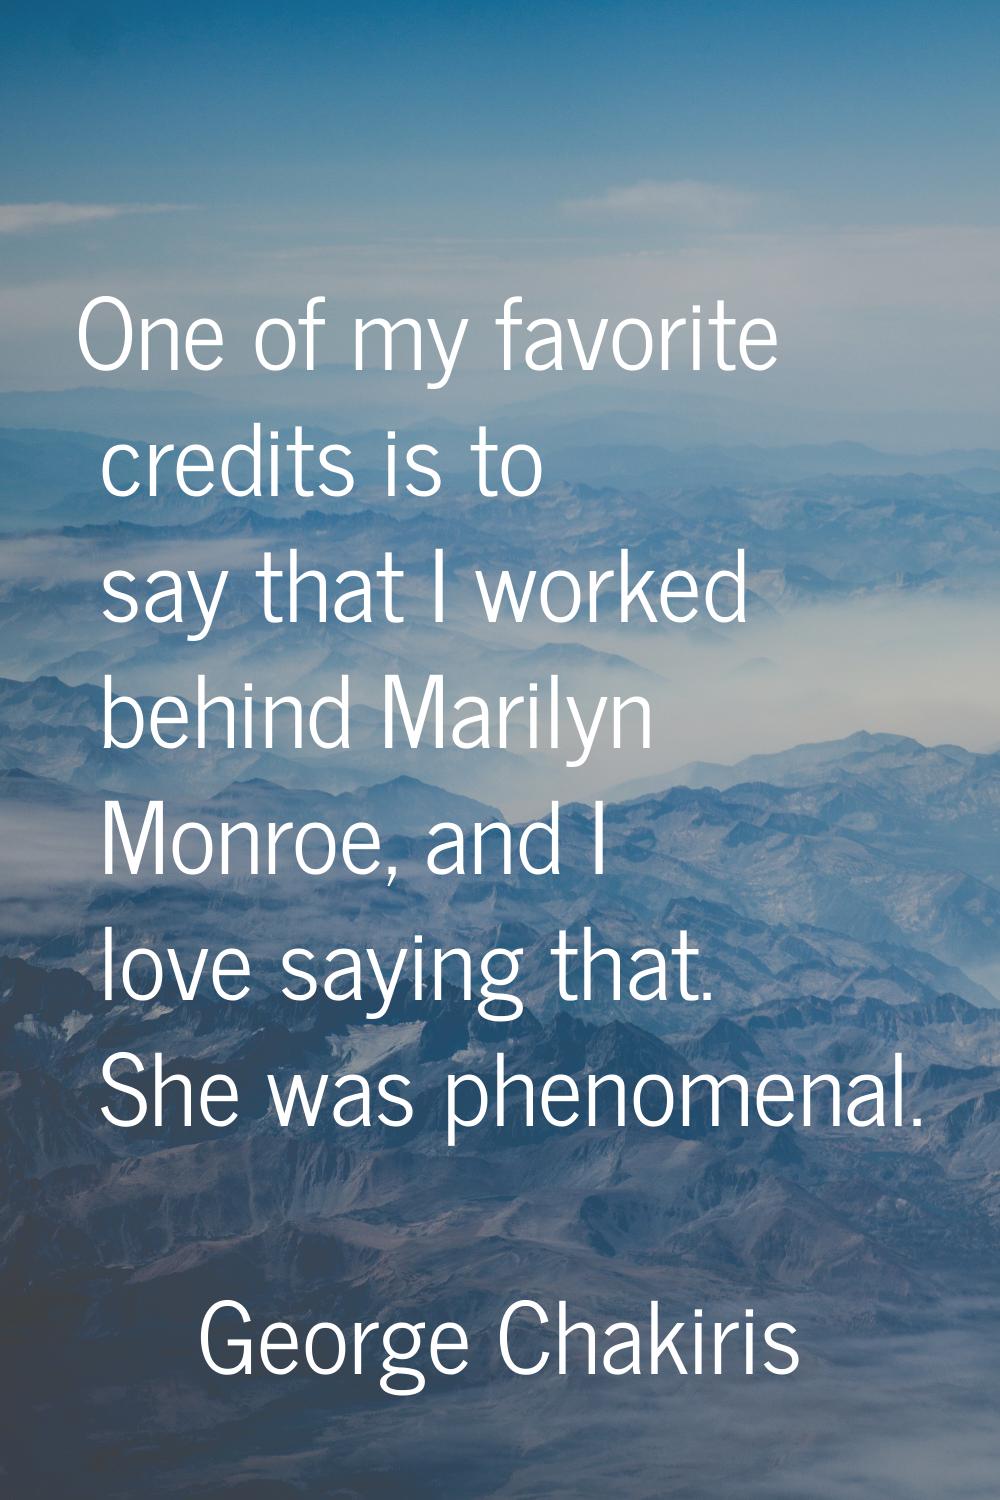 One of my favorite credits is to say that I worked behind Marilyn Monroe, and I love saying that. S